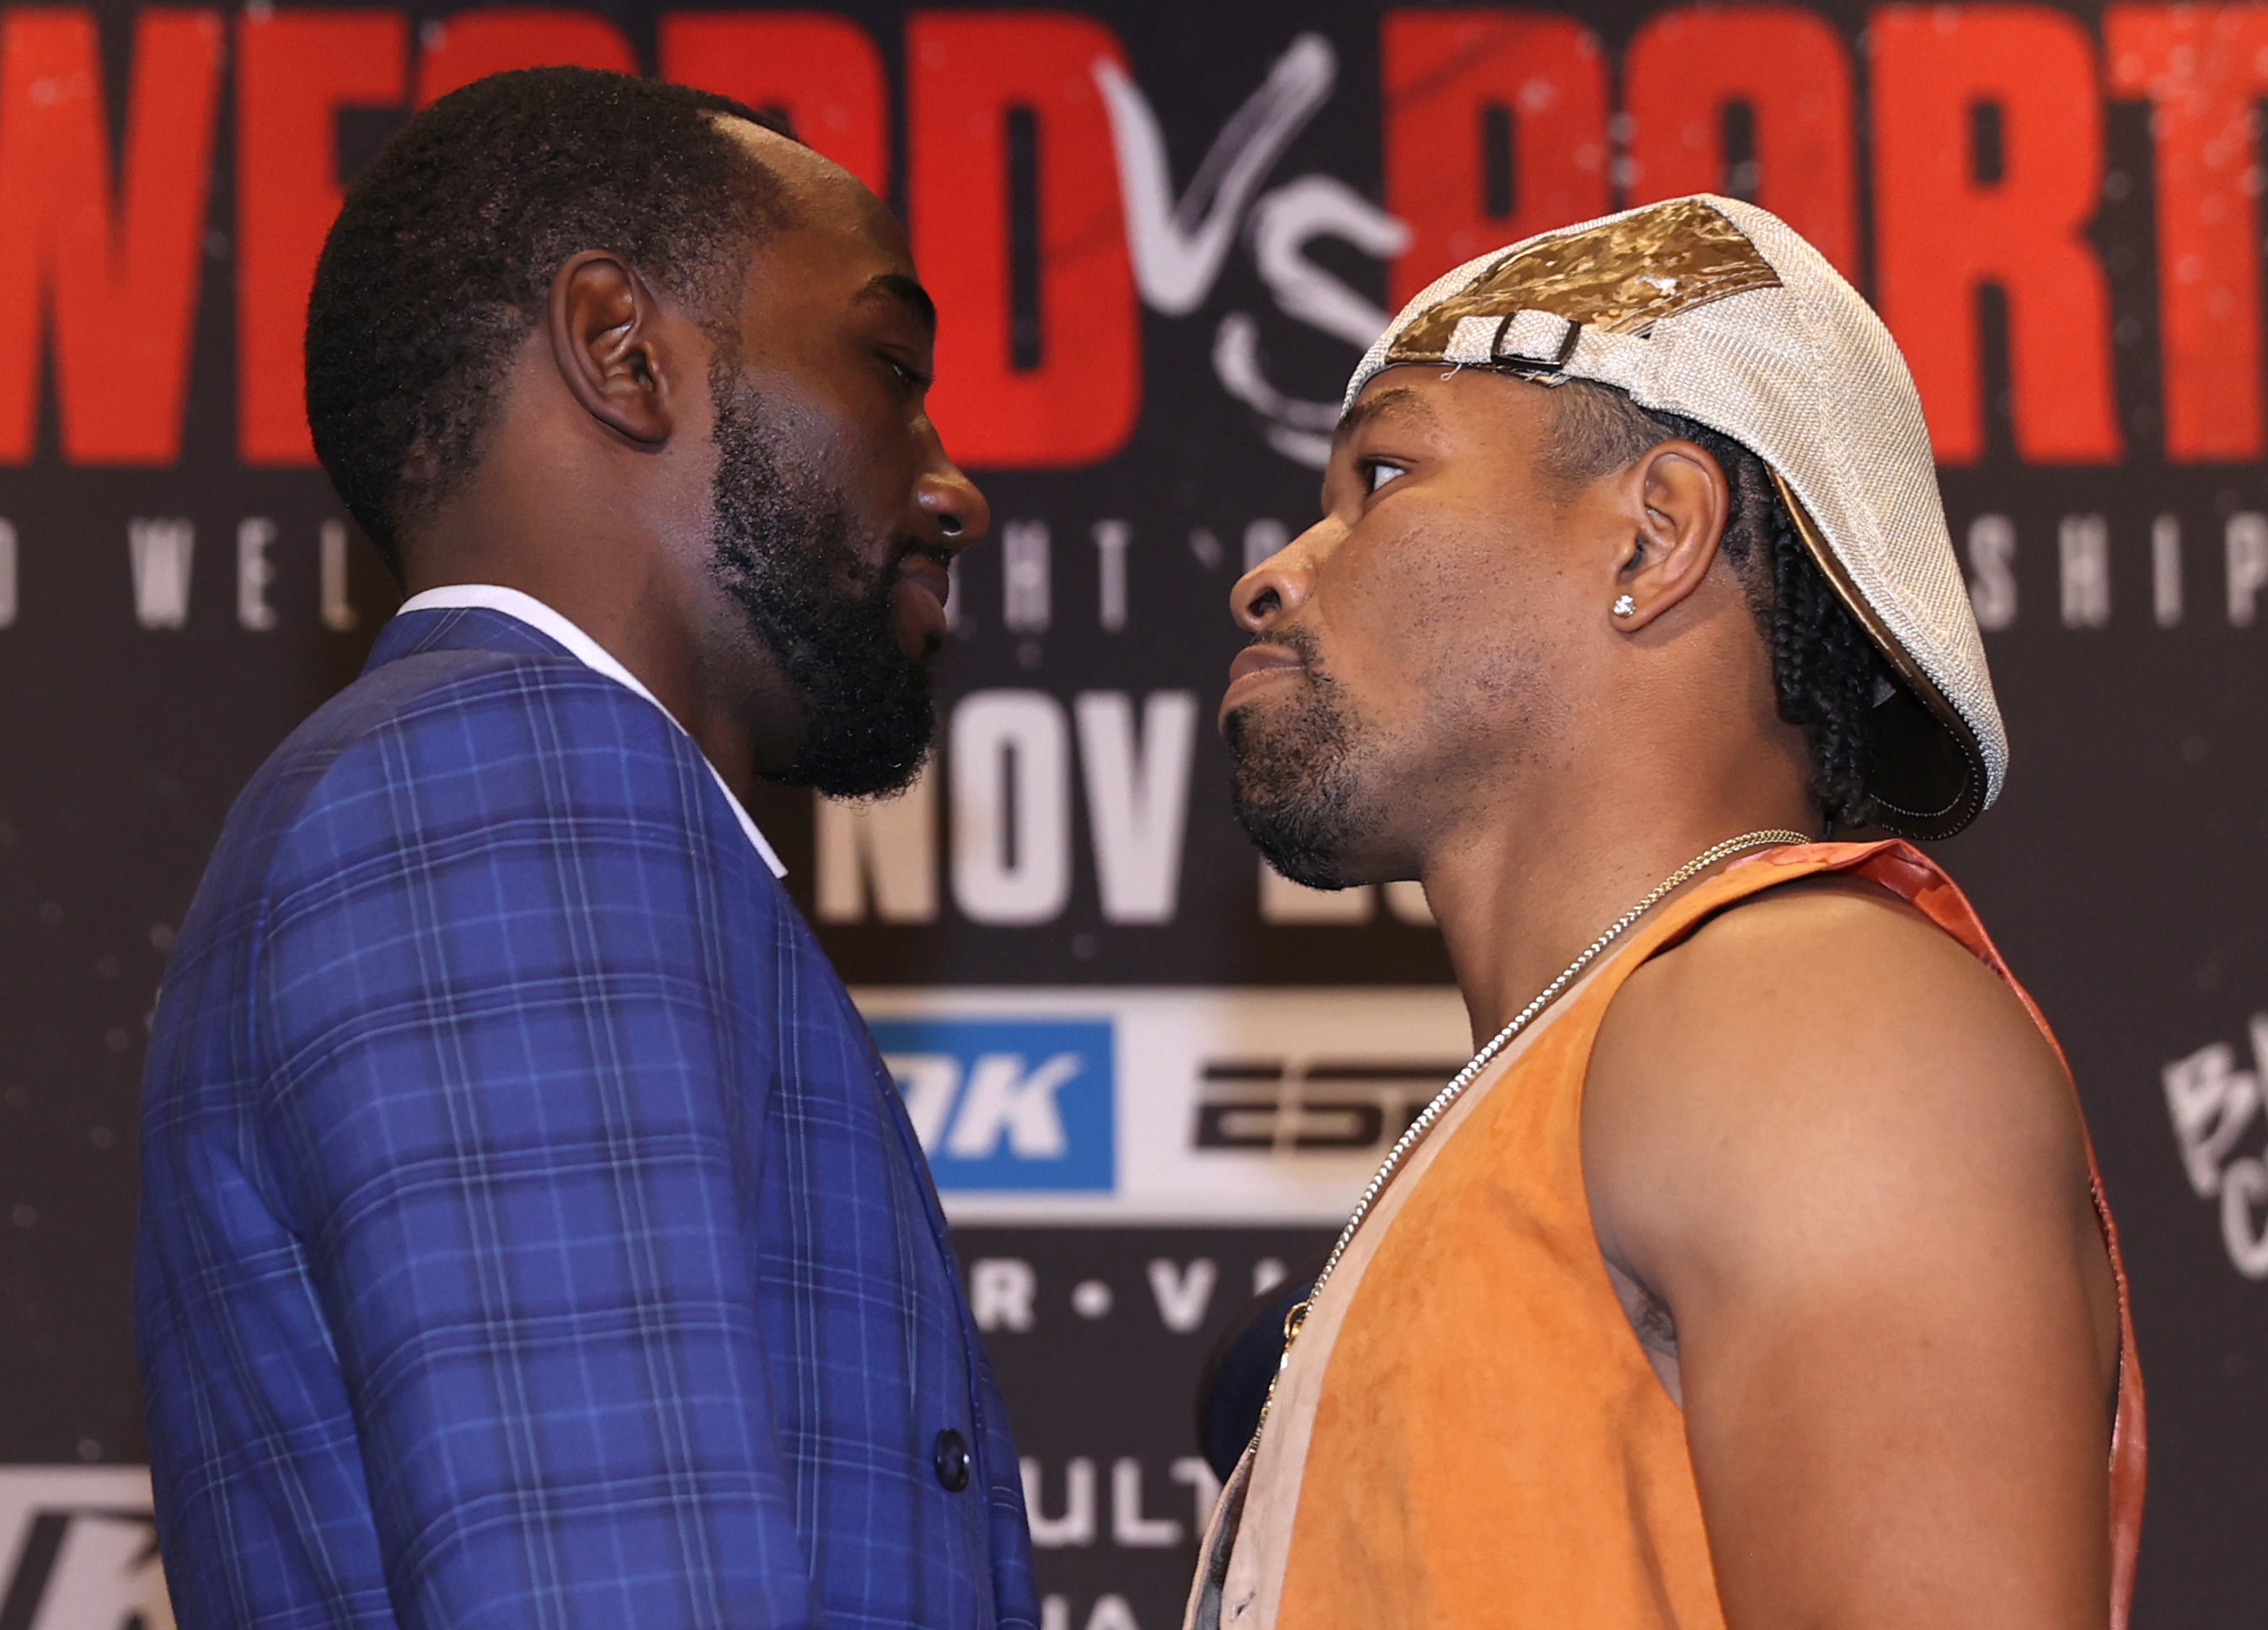 Who wins Crawford vs Porter on Saturday night? We’ve got our picks in!